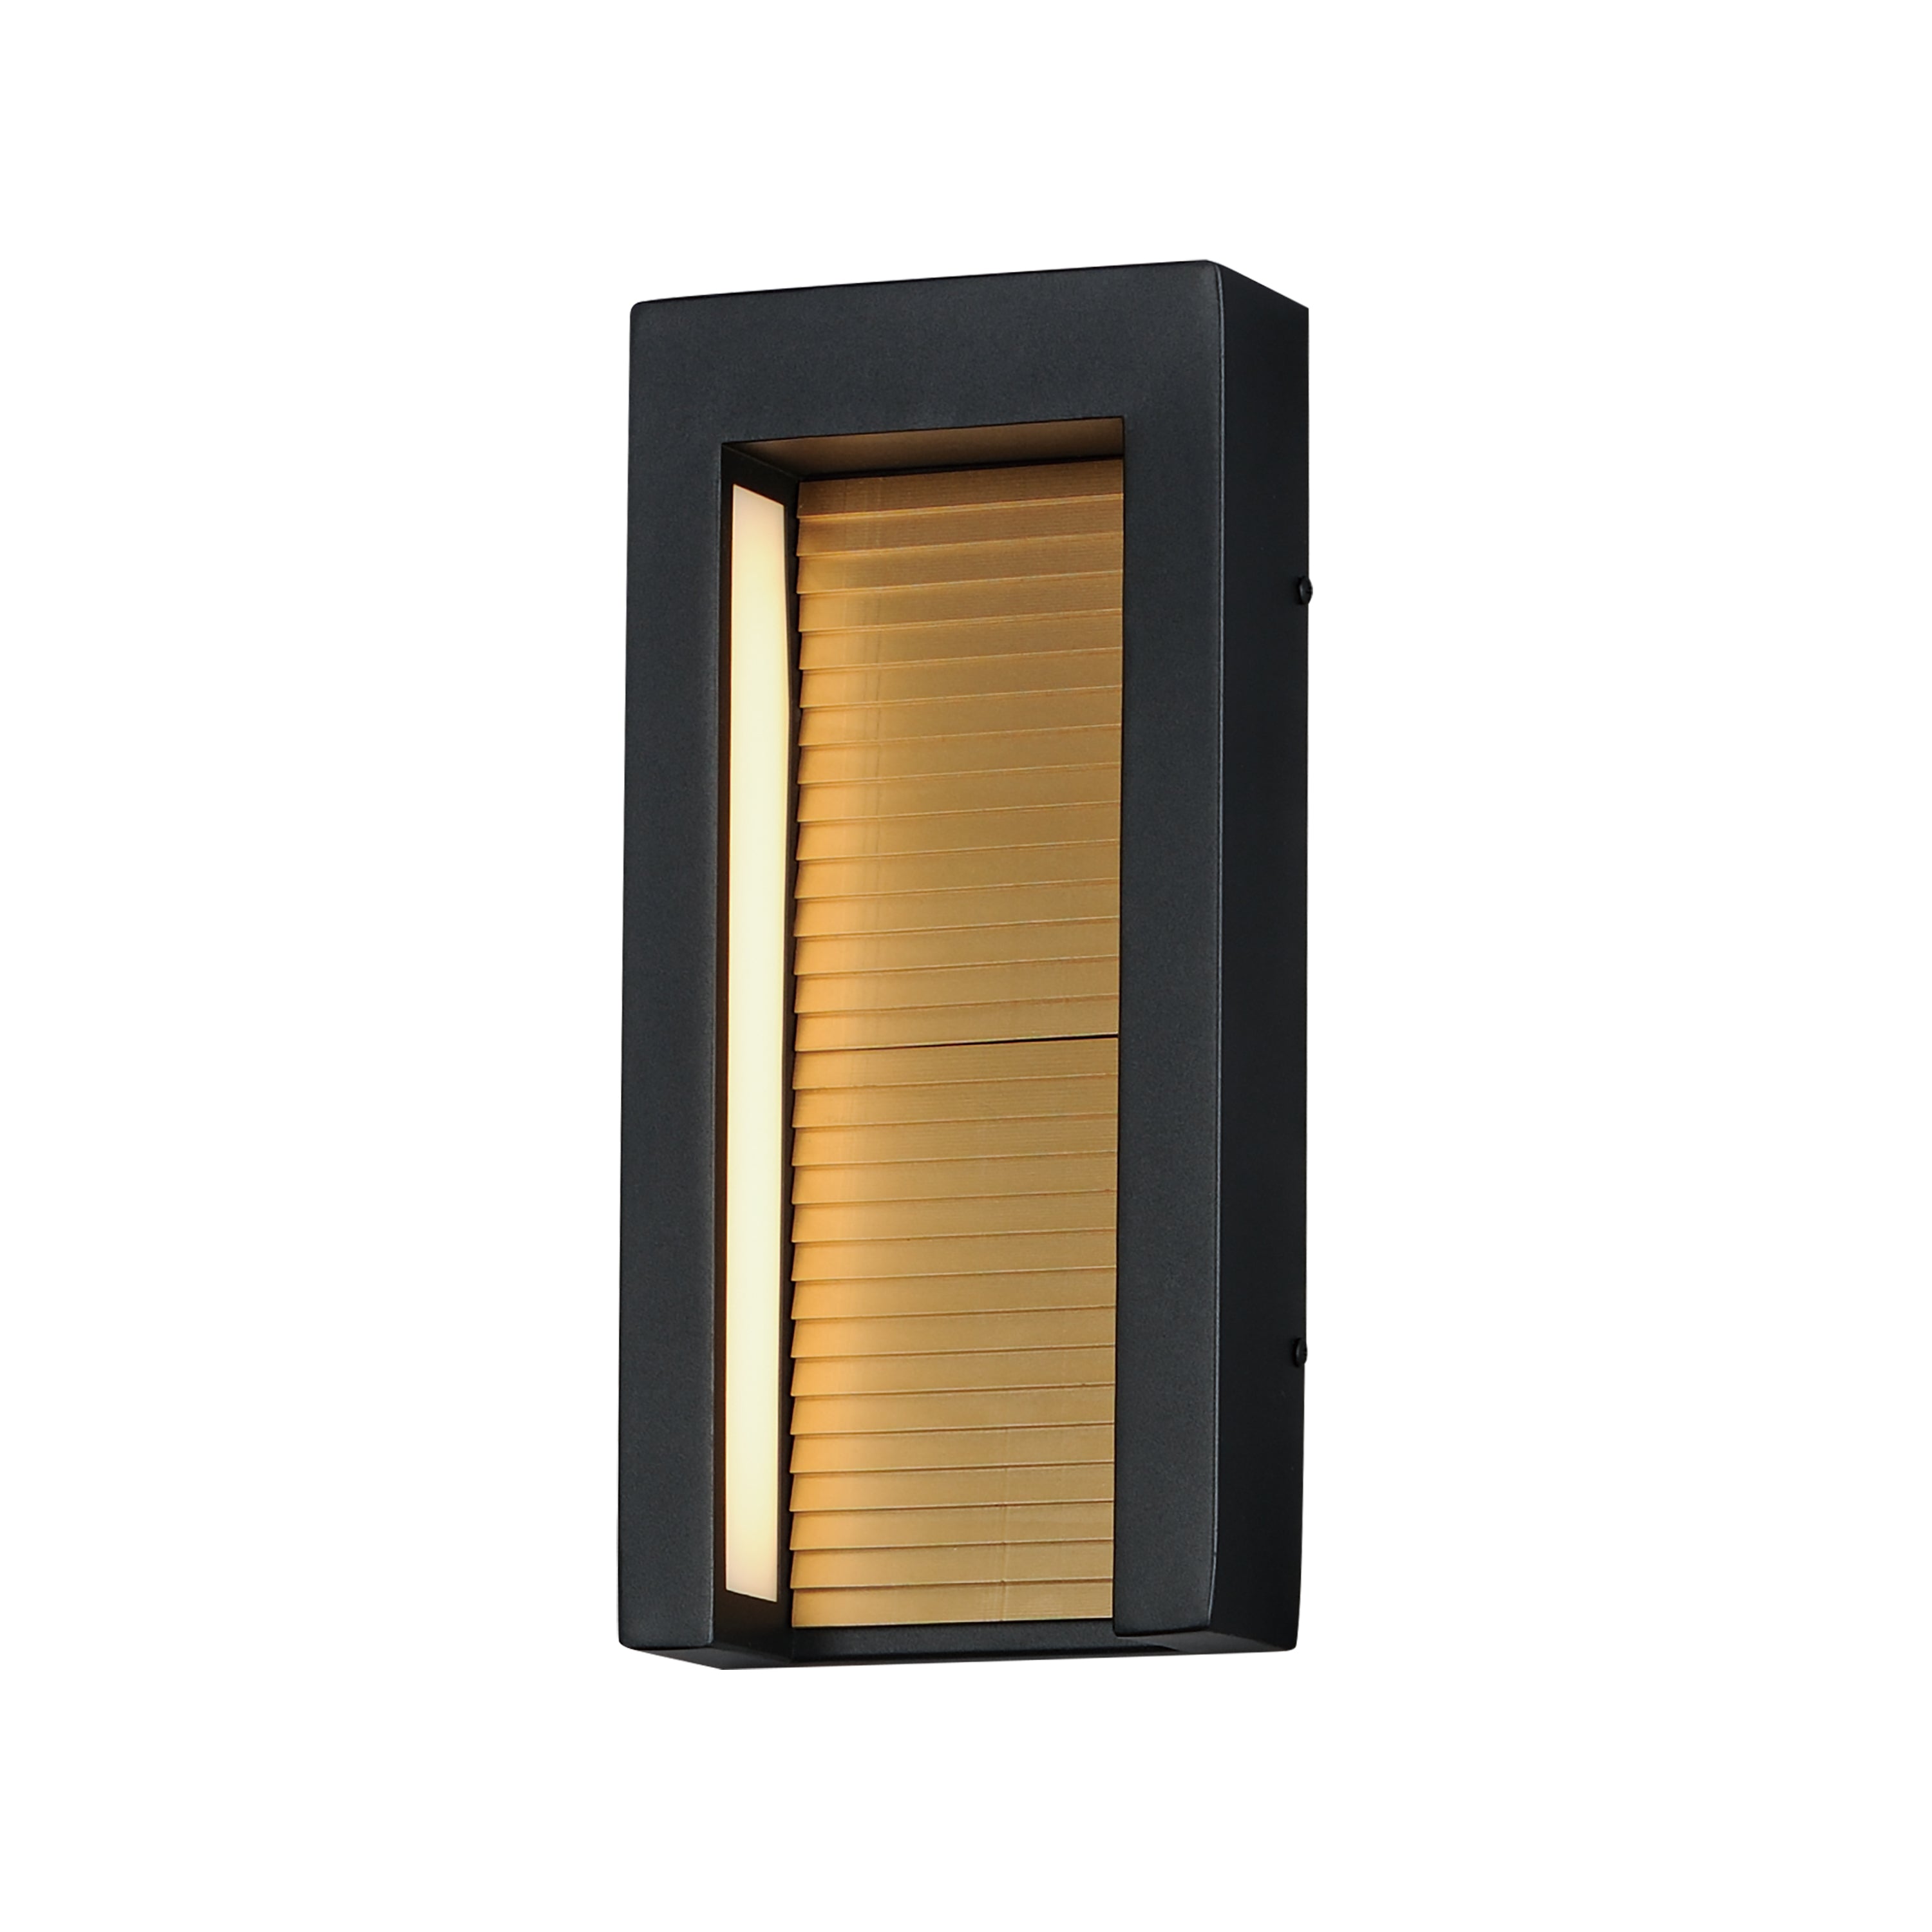 ALCOVE Outdoor wall sconce Black, Gold INTEGRATED LED - E30104-BKGLD | MAXIM/ET3